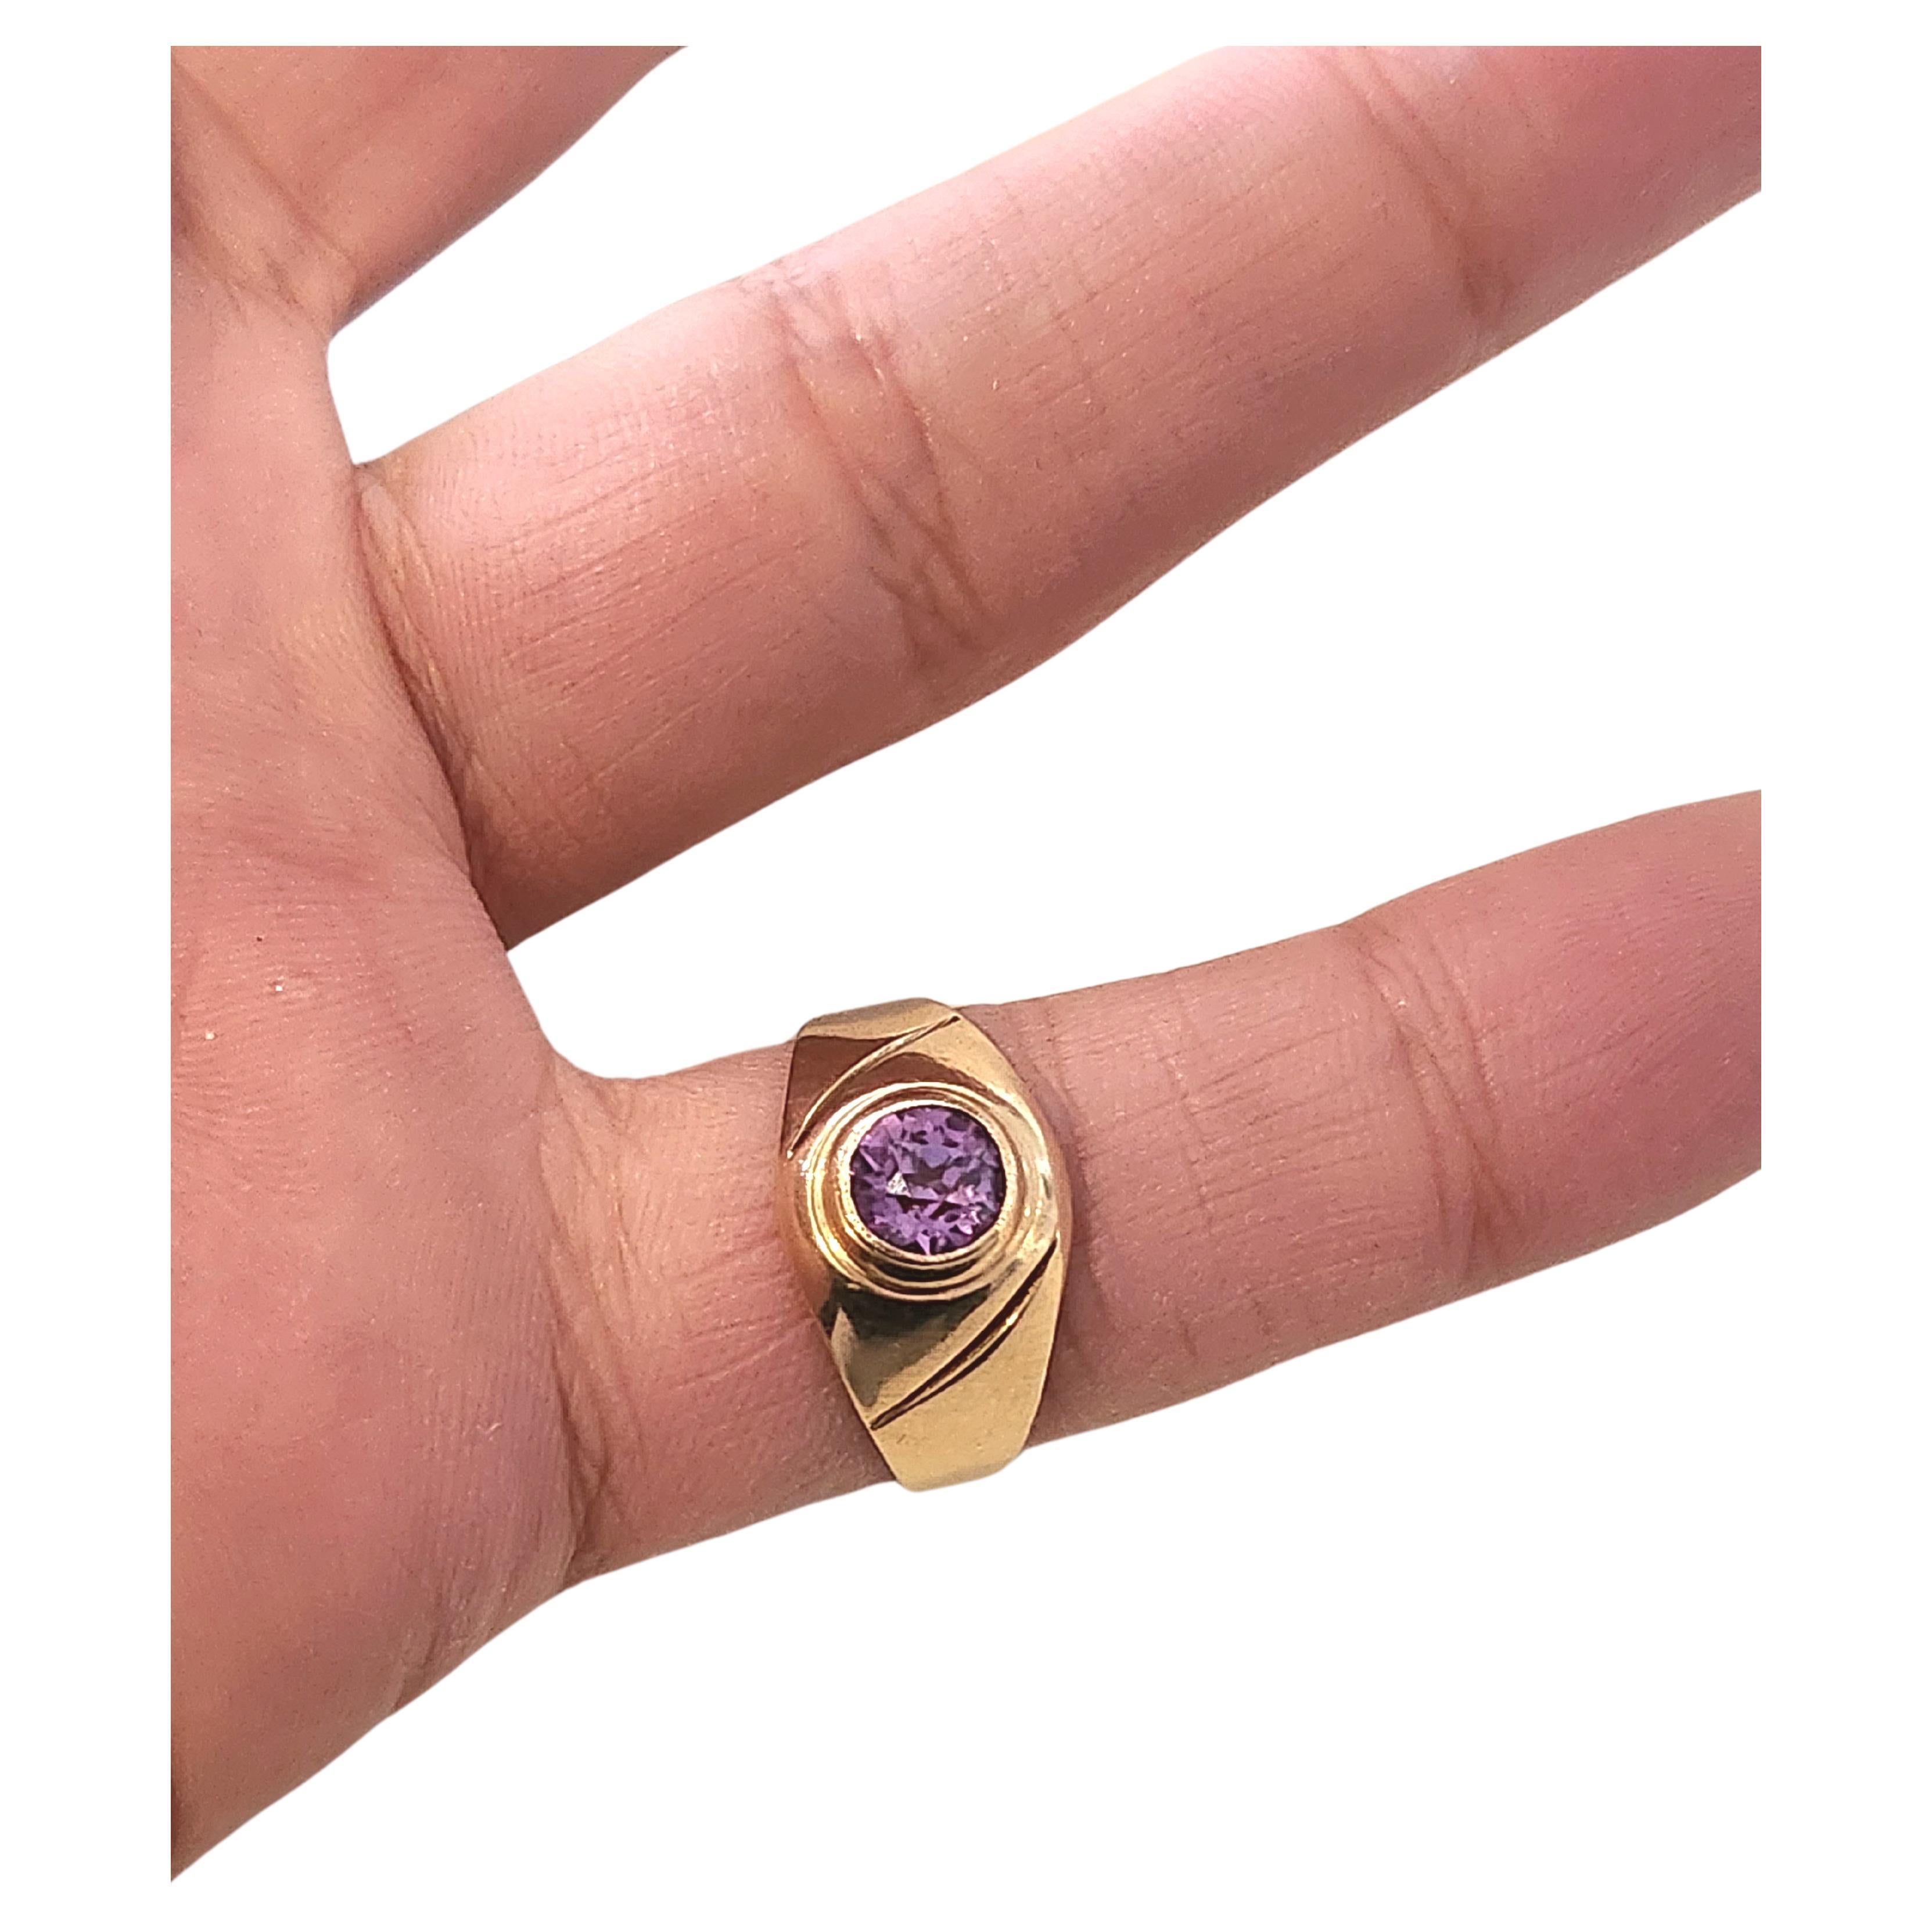 Vintage 14k gold ring centered with lab alexandrite stone changes color in light hall marked 583 and initial maker mark ring was made in armenia dates 1960s 